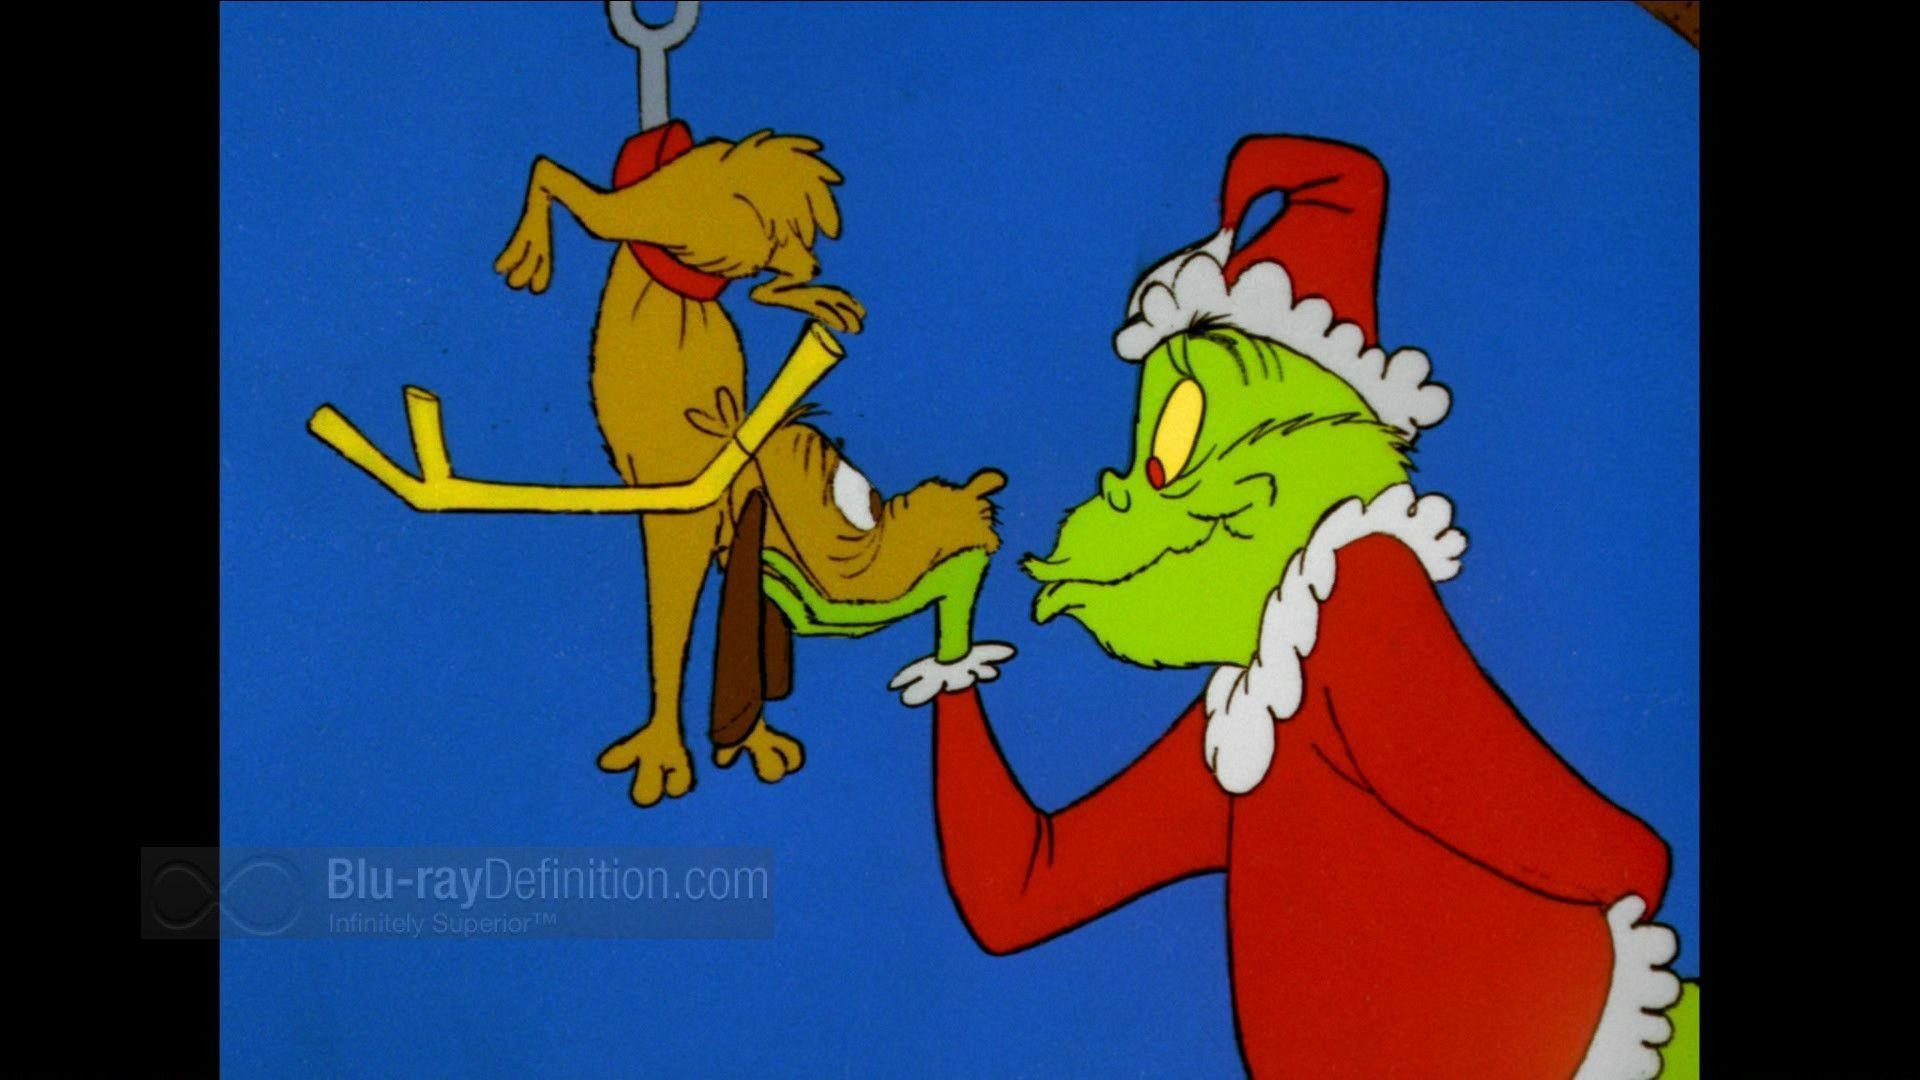 Xmas Stuff For > The Grinch Christmas Wallpaper